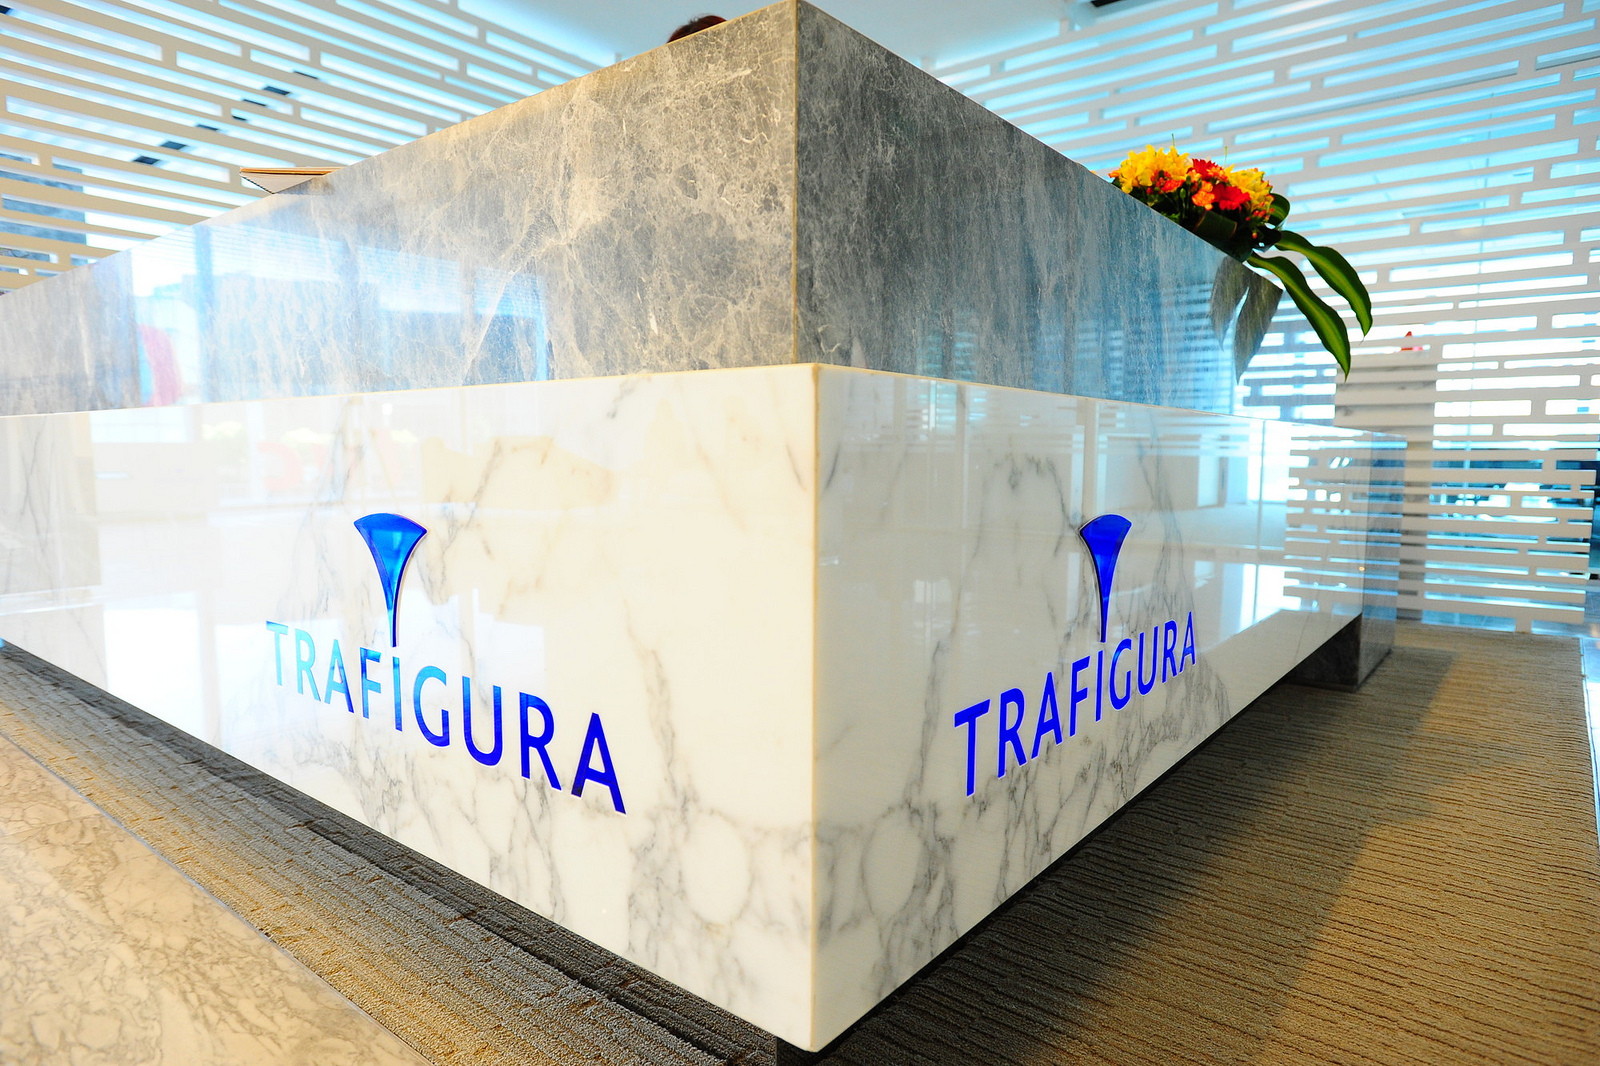 Trading firm Trafigura sees oil price rising to $70s/bl in 2020